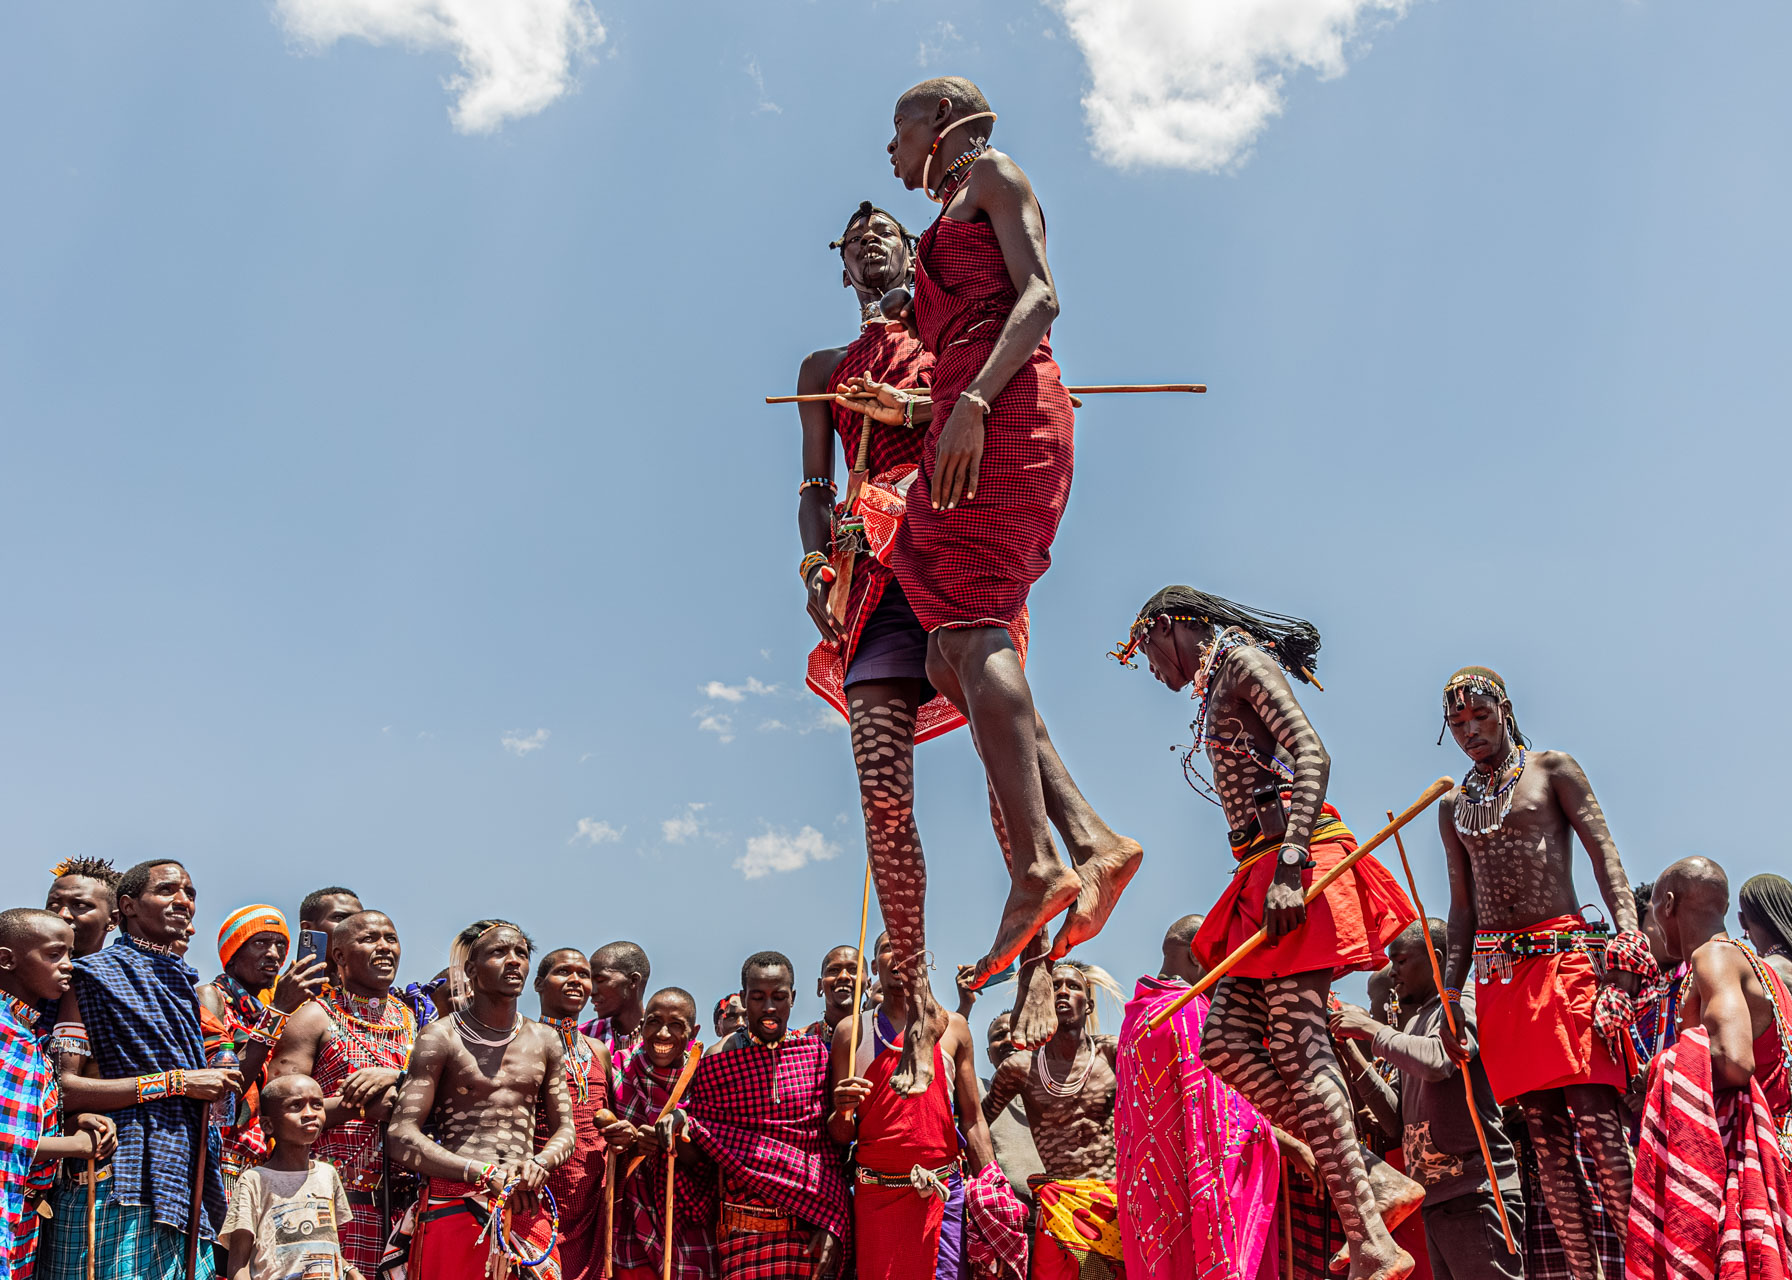 Jumping competitions are what the Maasai are most famous for 